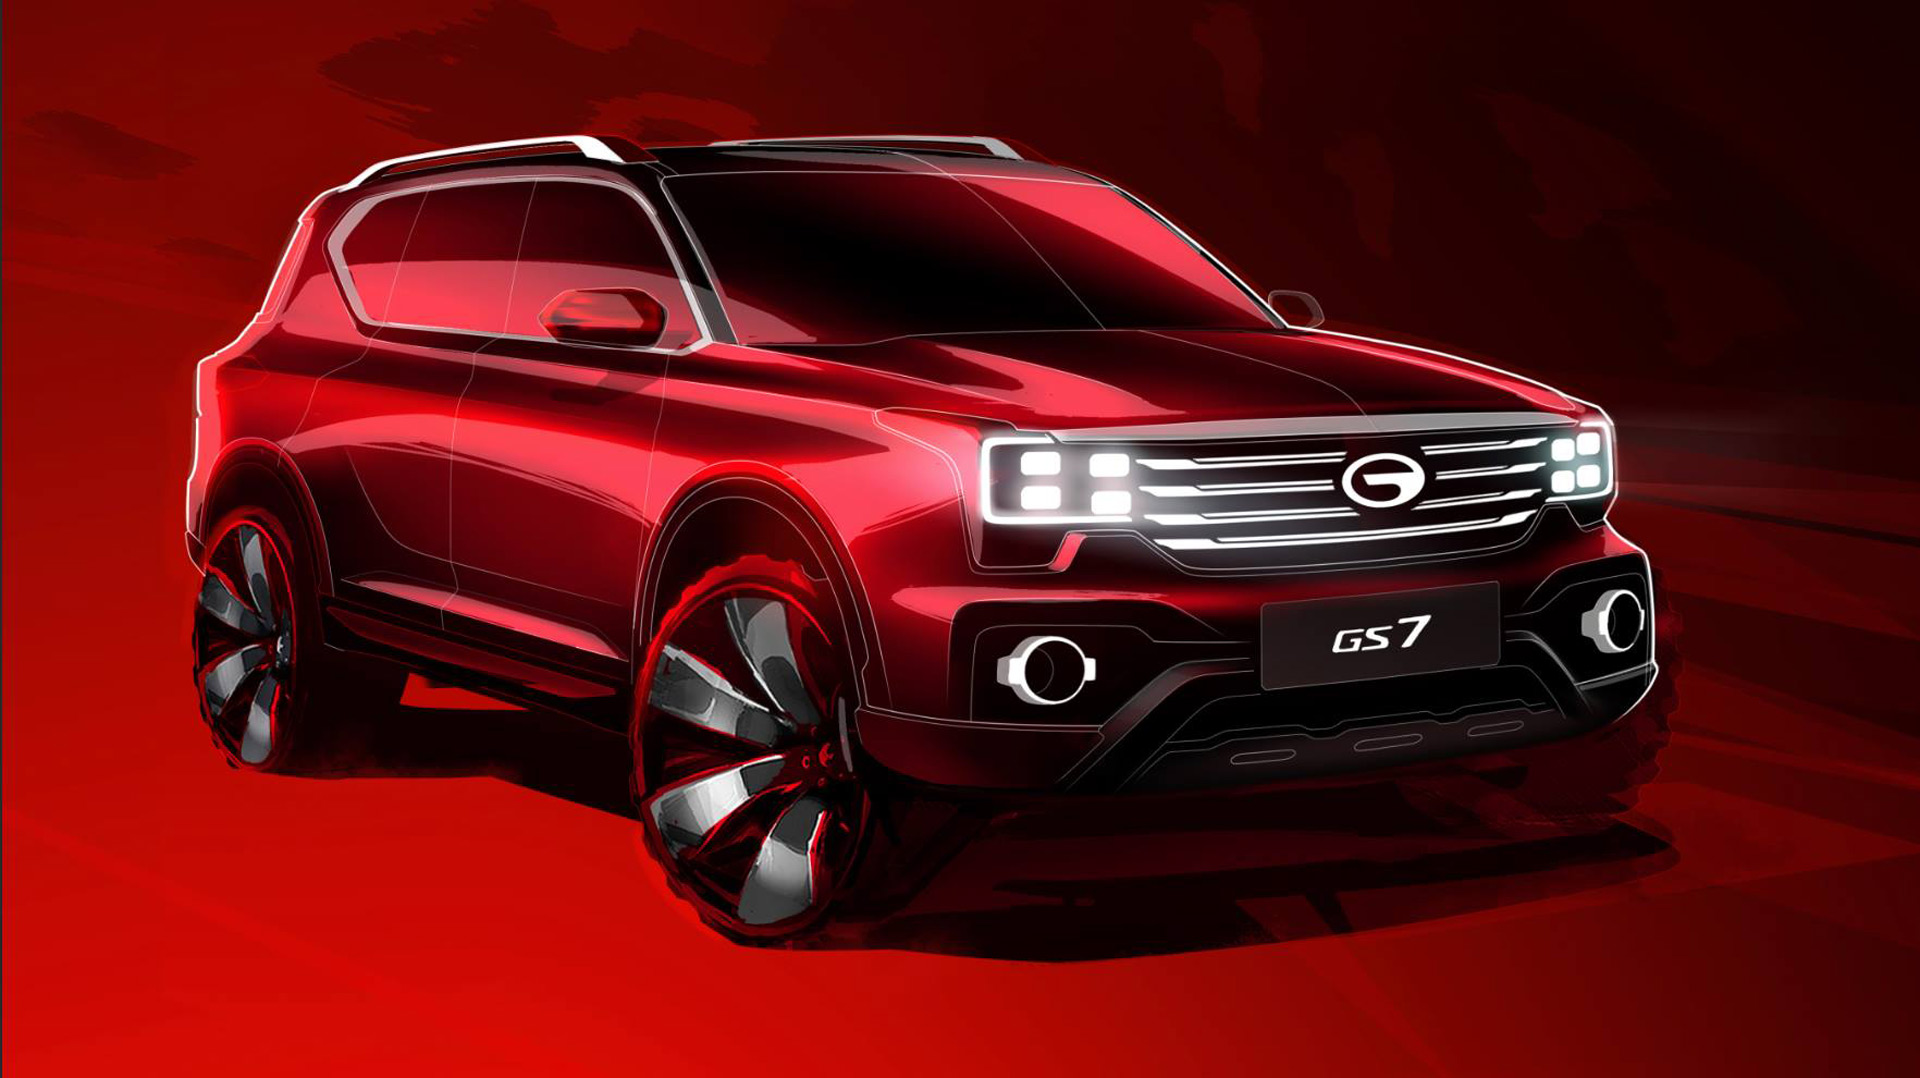 Chinese automaker to show three cars at 2018 Detroit auto show